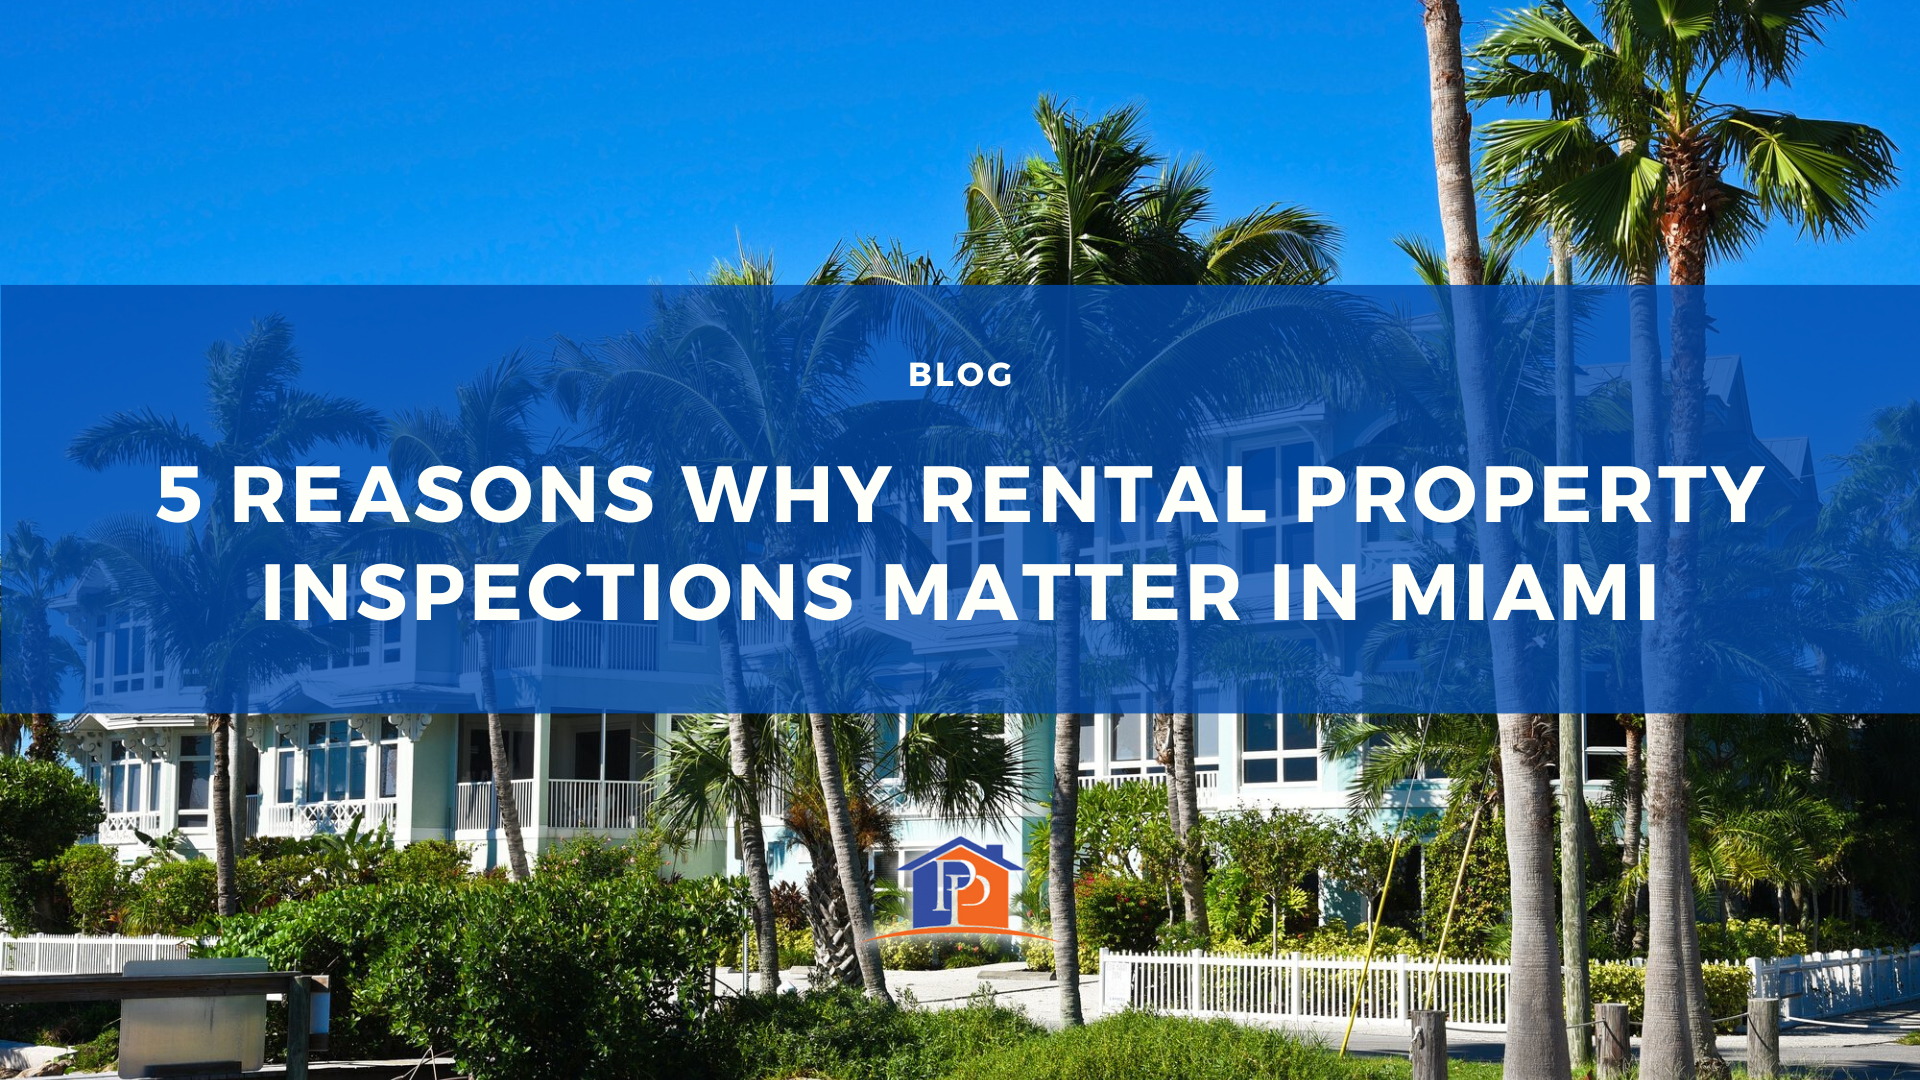 5 Reasons Why Rental Property Inspections Matter in Miami